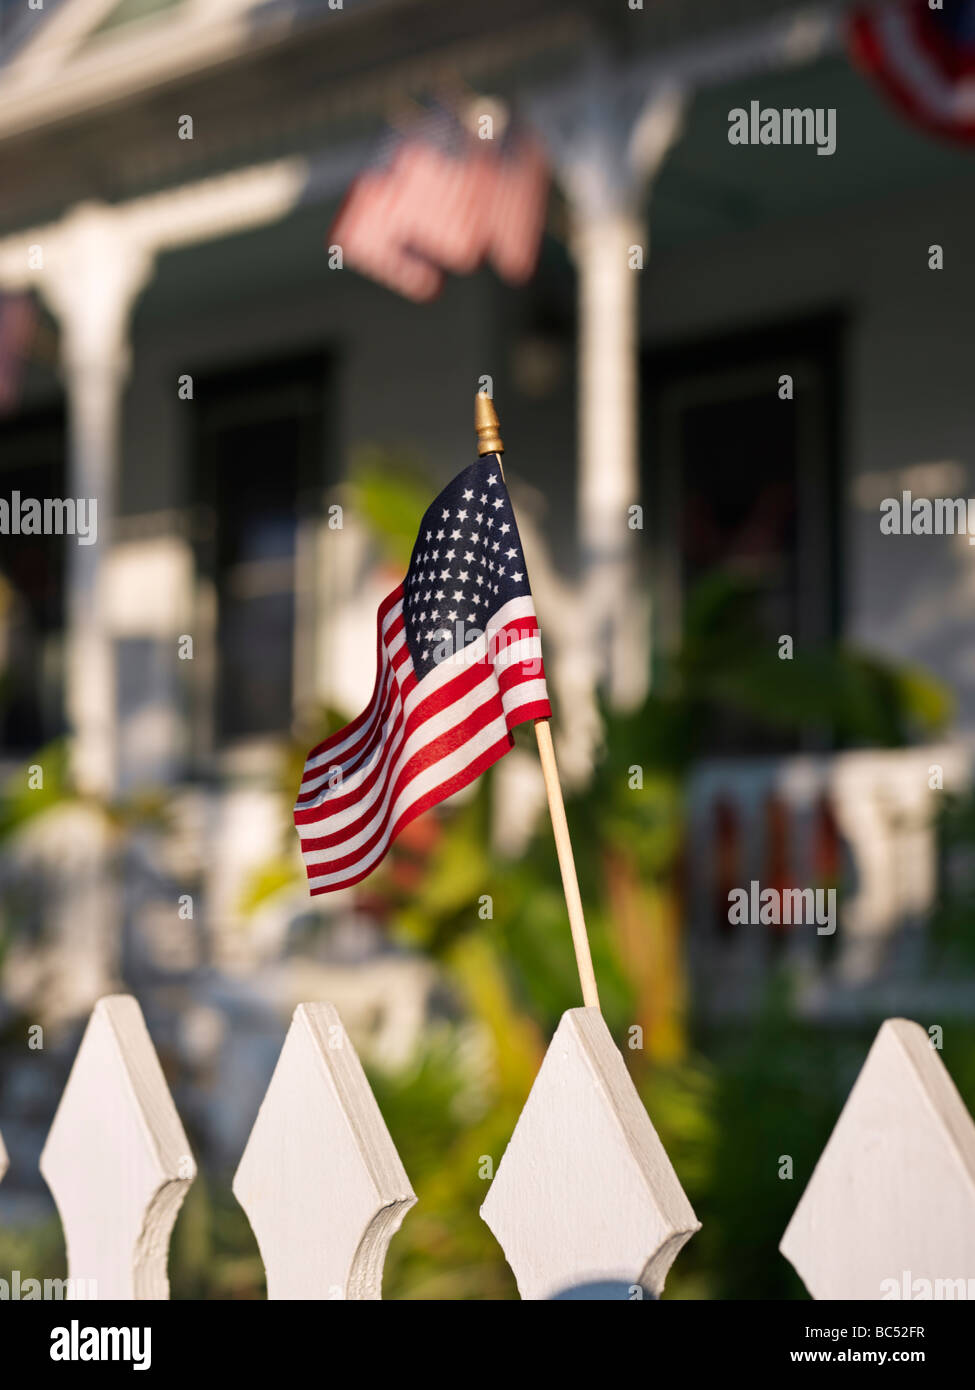 Flag of the United States on a picket fence Stock Photo